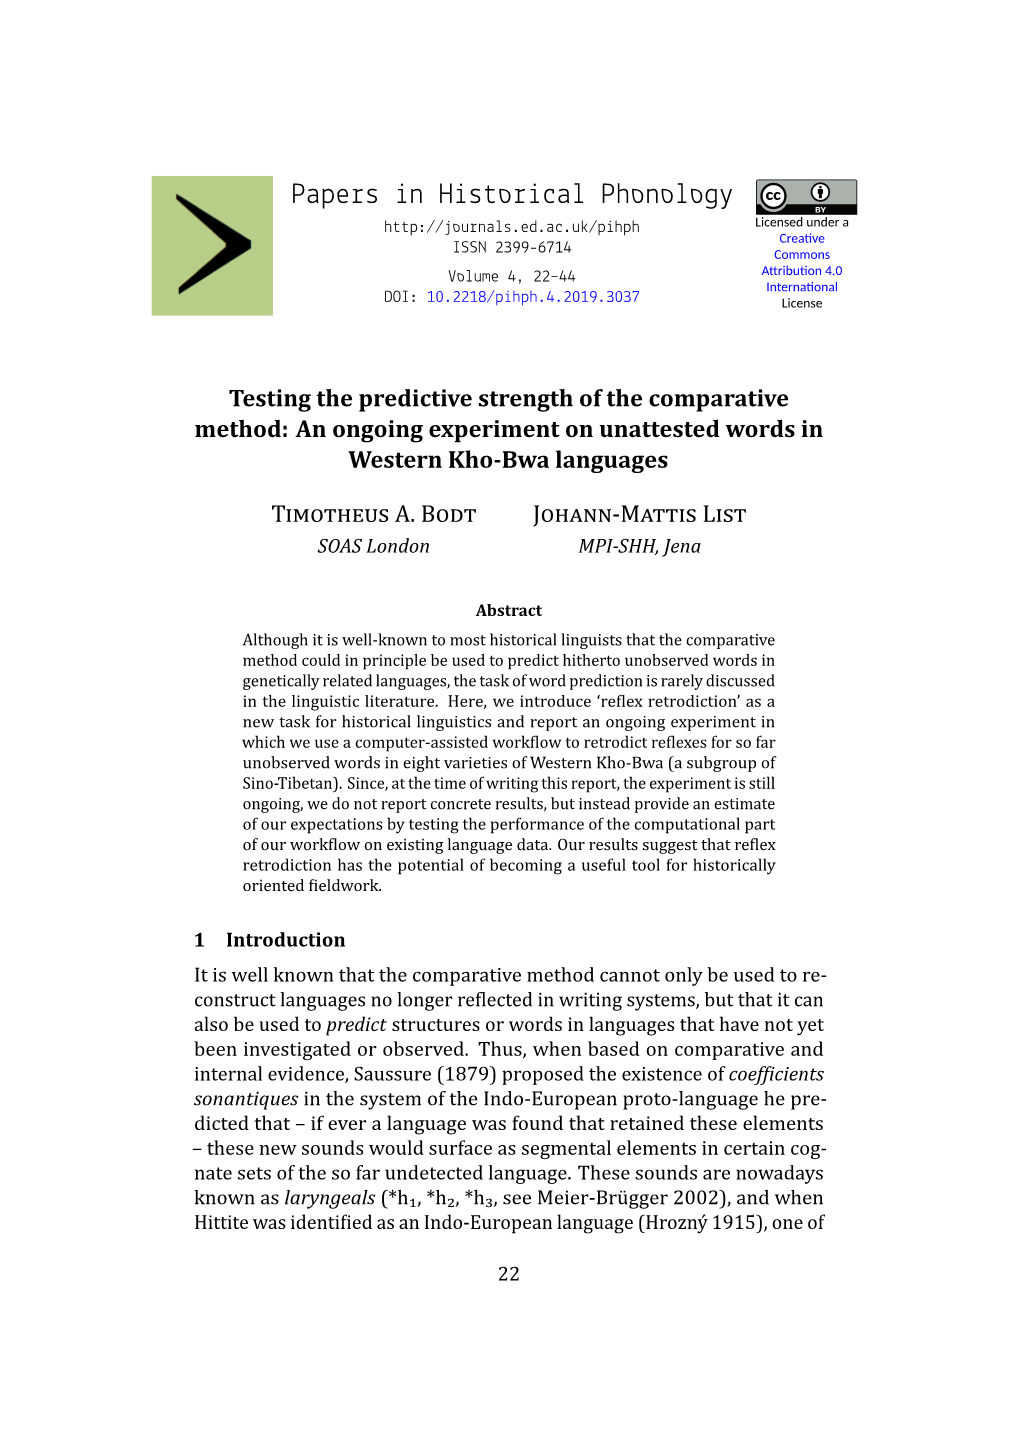 Testing the Predictive Strength of the Comparative Method: an Ongoing Experiment on Unattested Words in Western Kho-Bwa Languages